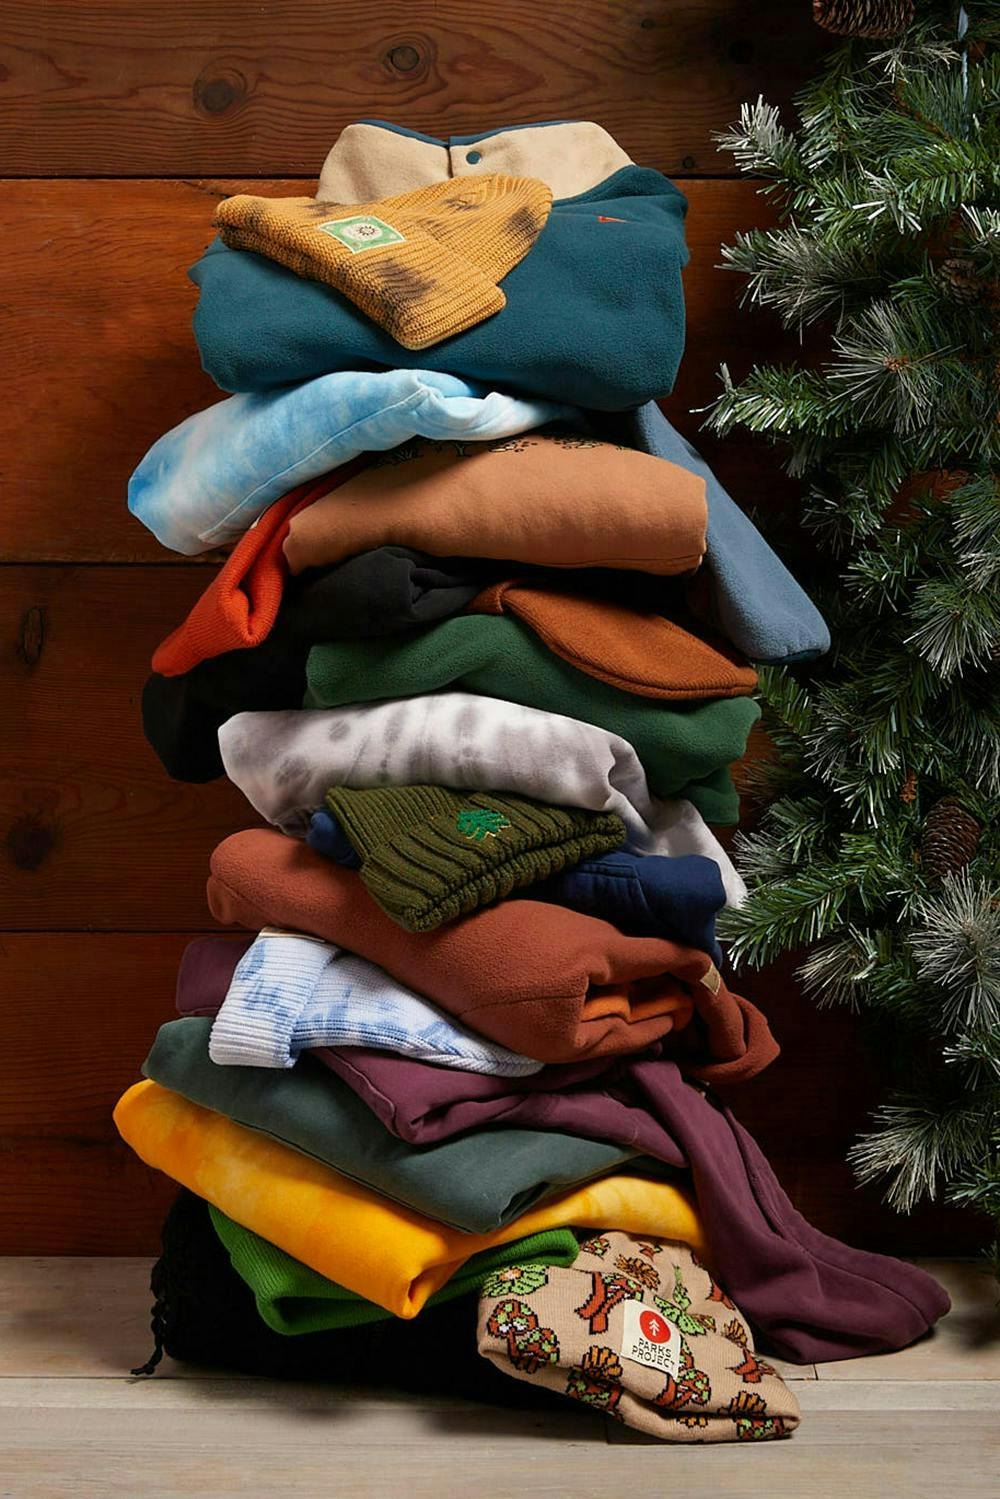 winter apparel stacked for a Christmas fashion photography photoshoot 